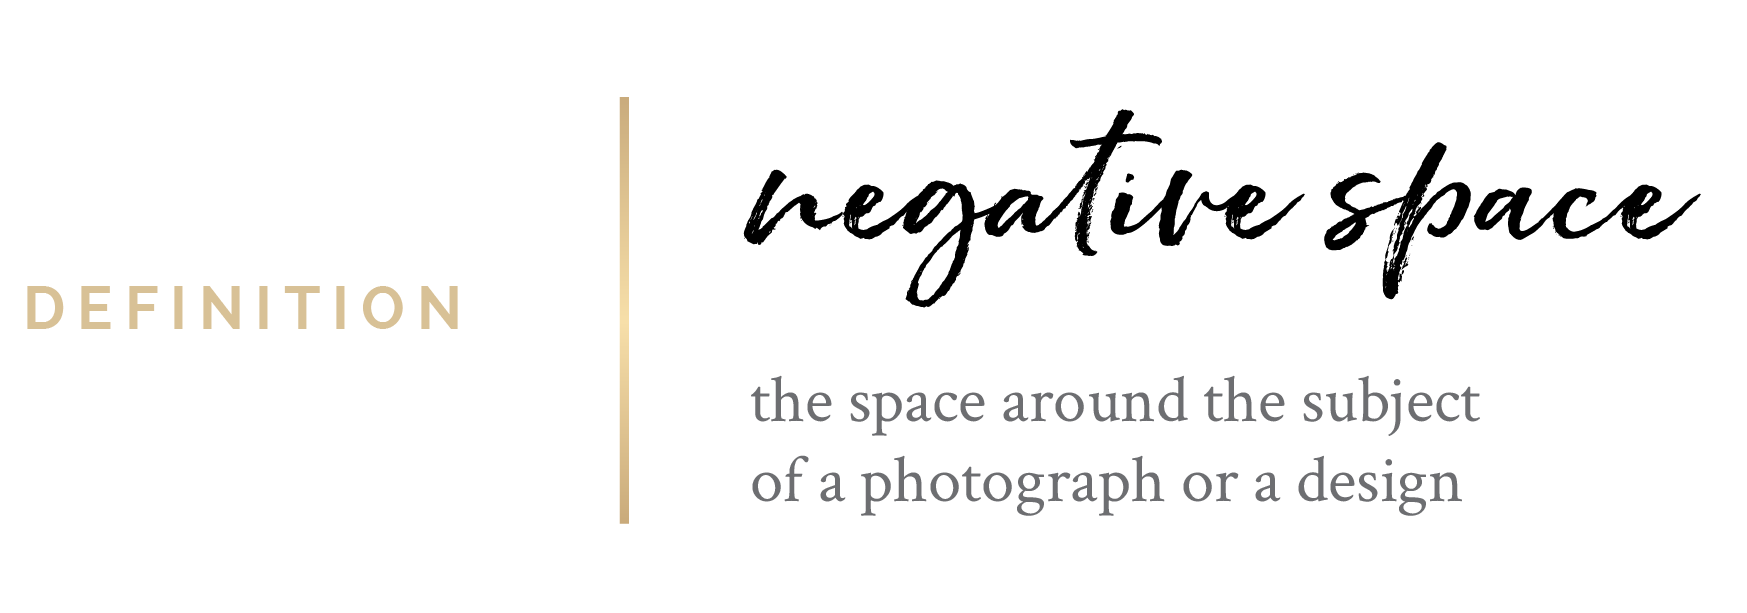 Definition: Negative Space | Branding and marketing terms from brand designer Moriah Riona